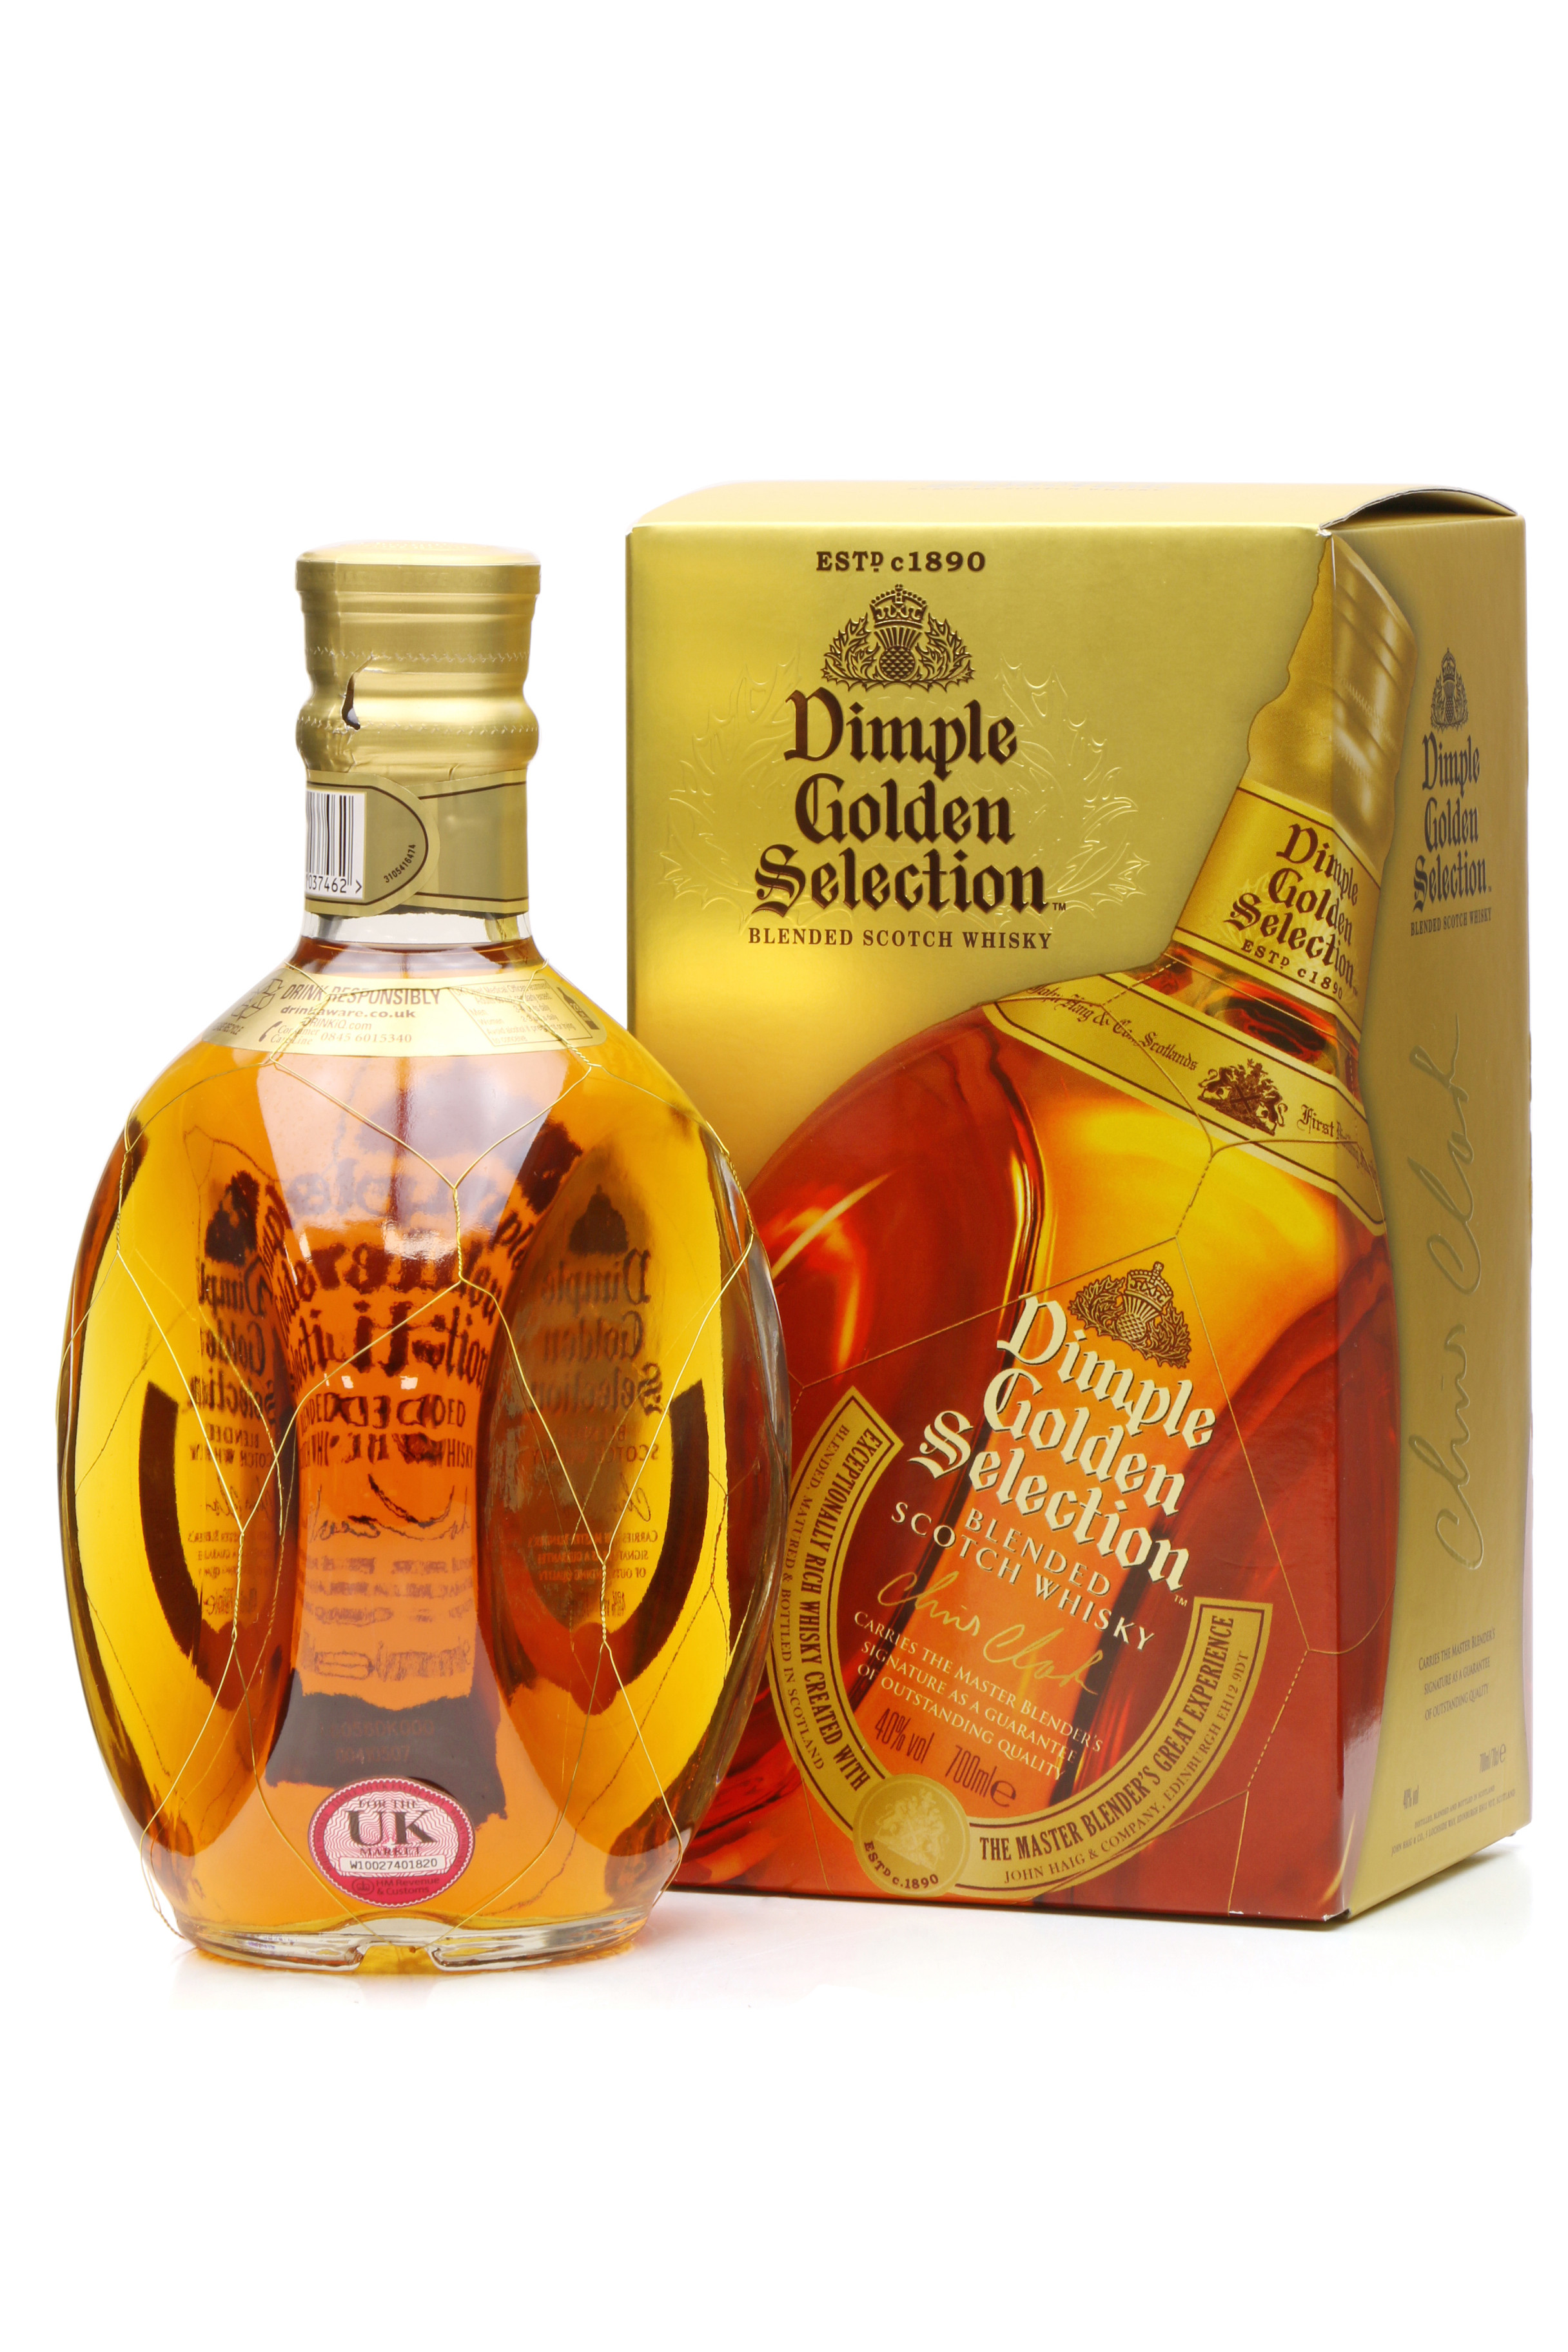 Selection - Dimple Golden Just Whisky Auctions